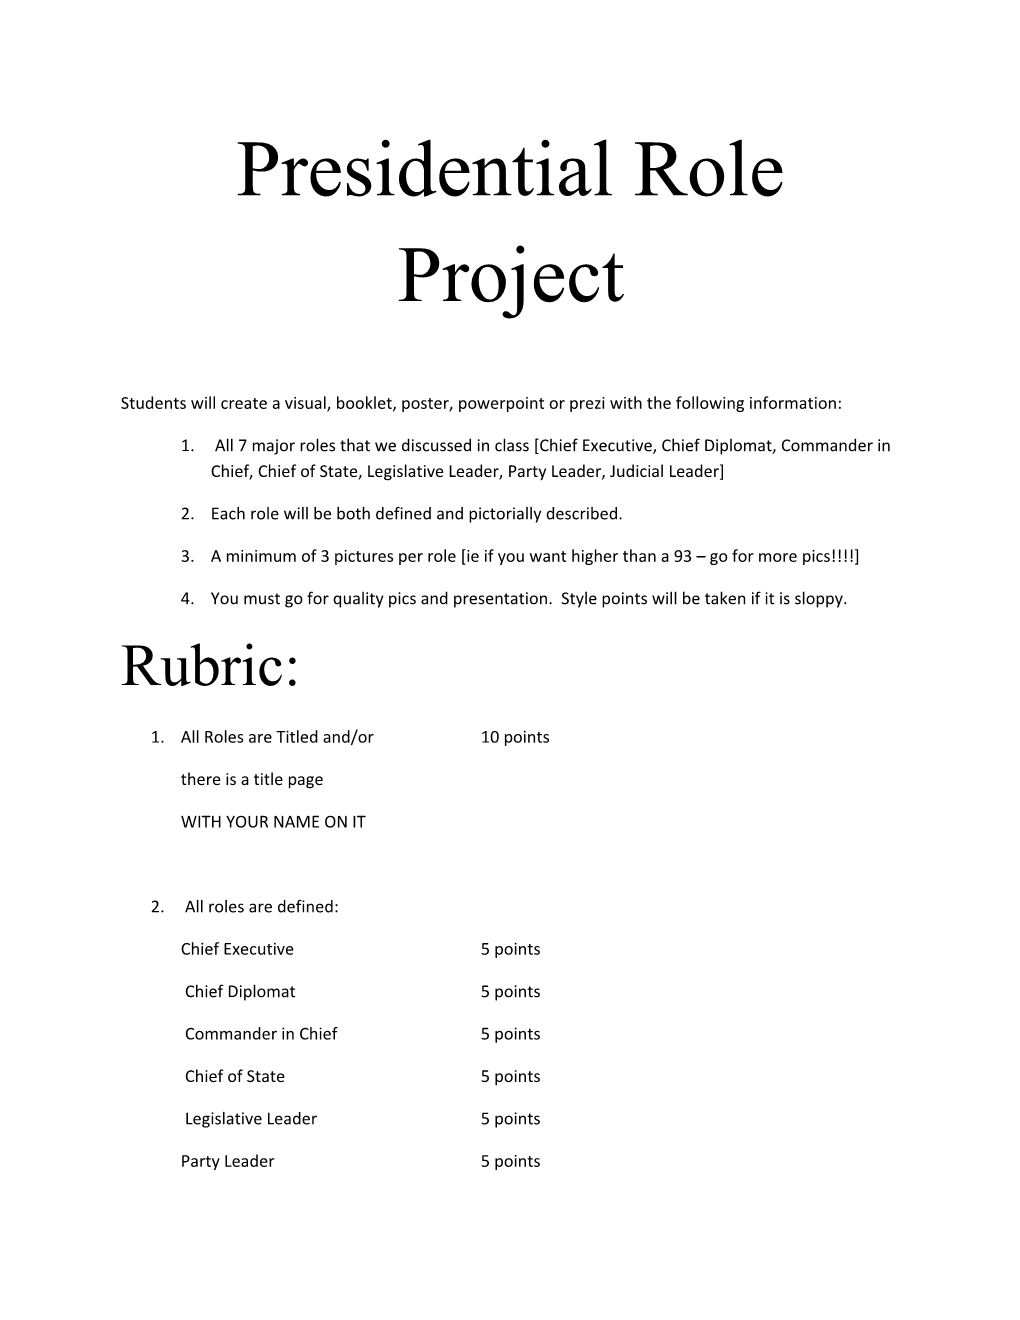 Presidential Role Project